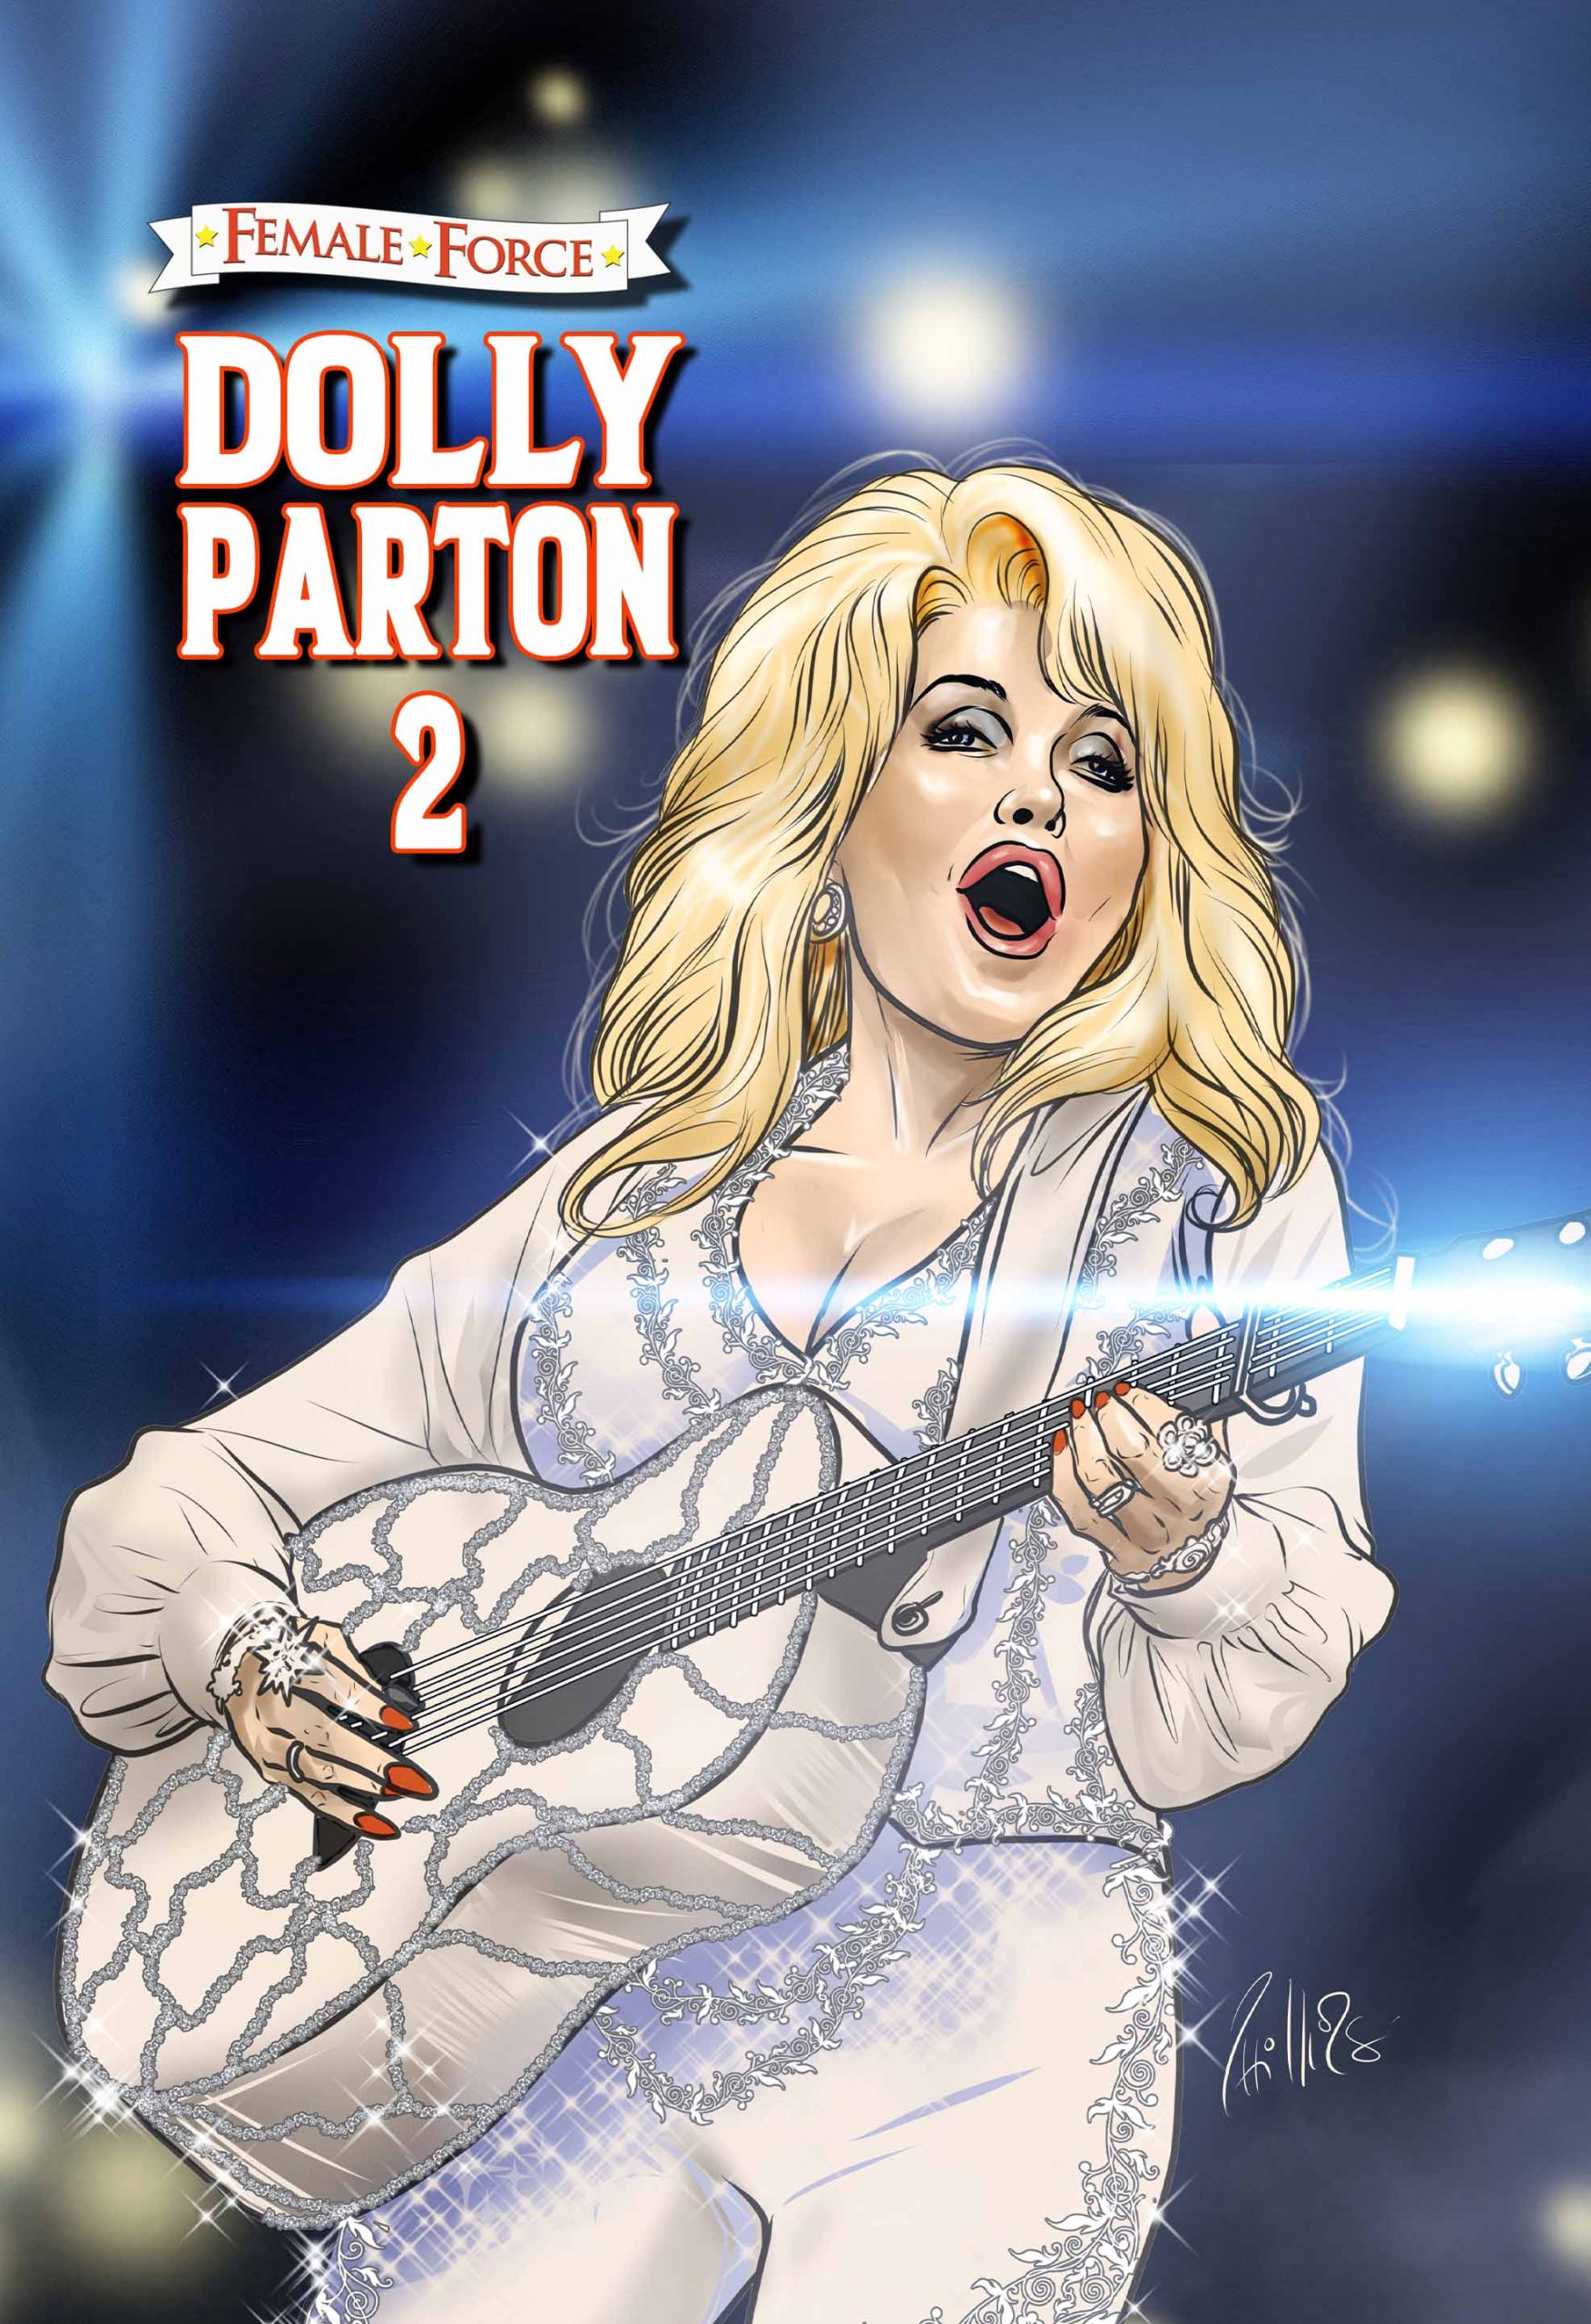 DOLLY PARTON COMIC BOOK SEQUEL OUT TODAY...HERE 'S THE FIRST LOOK!